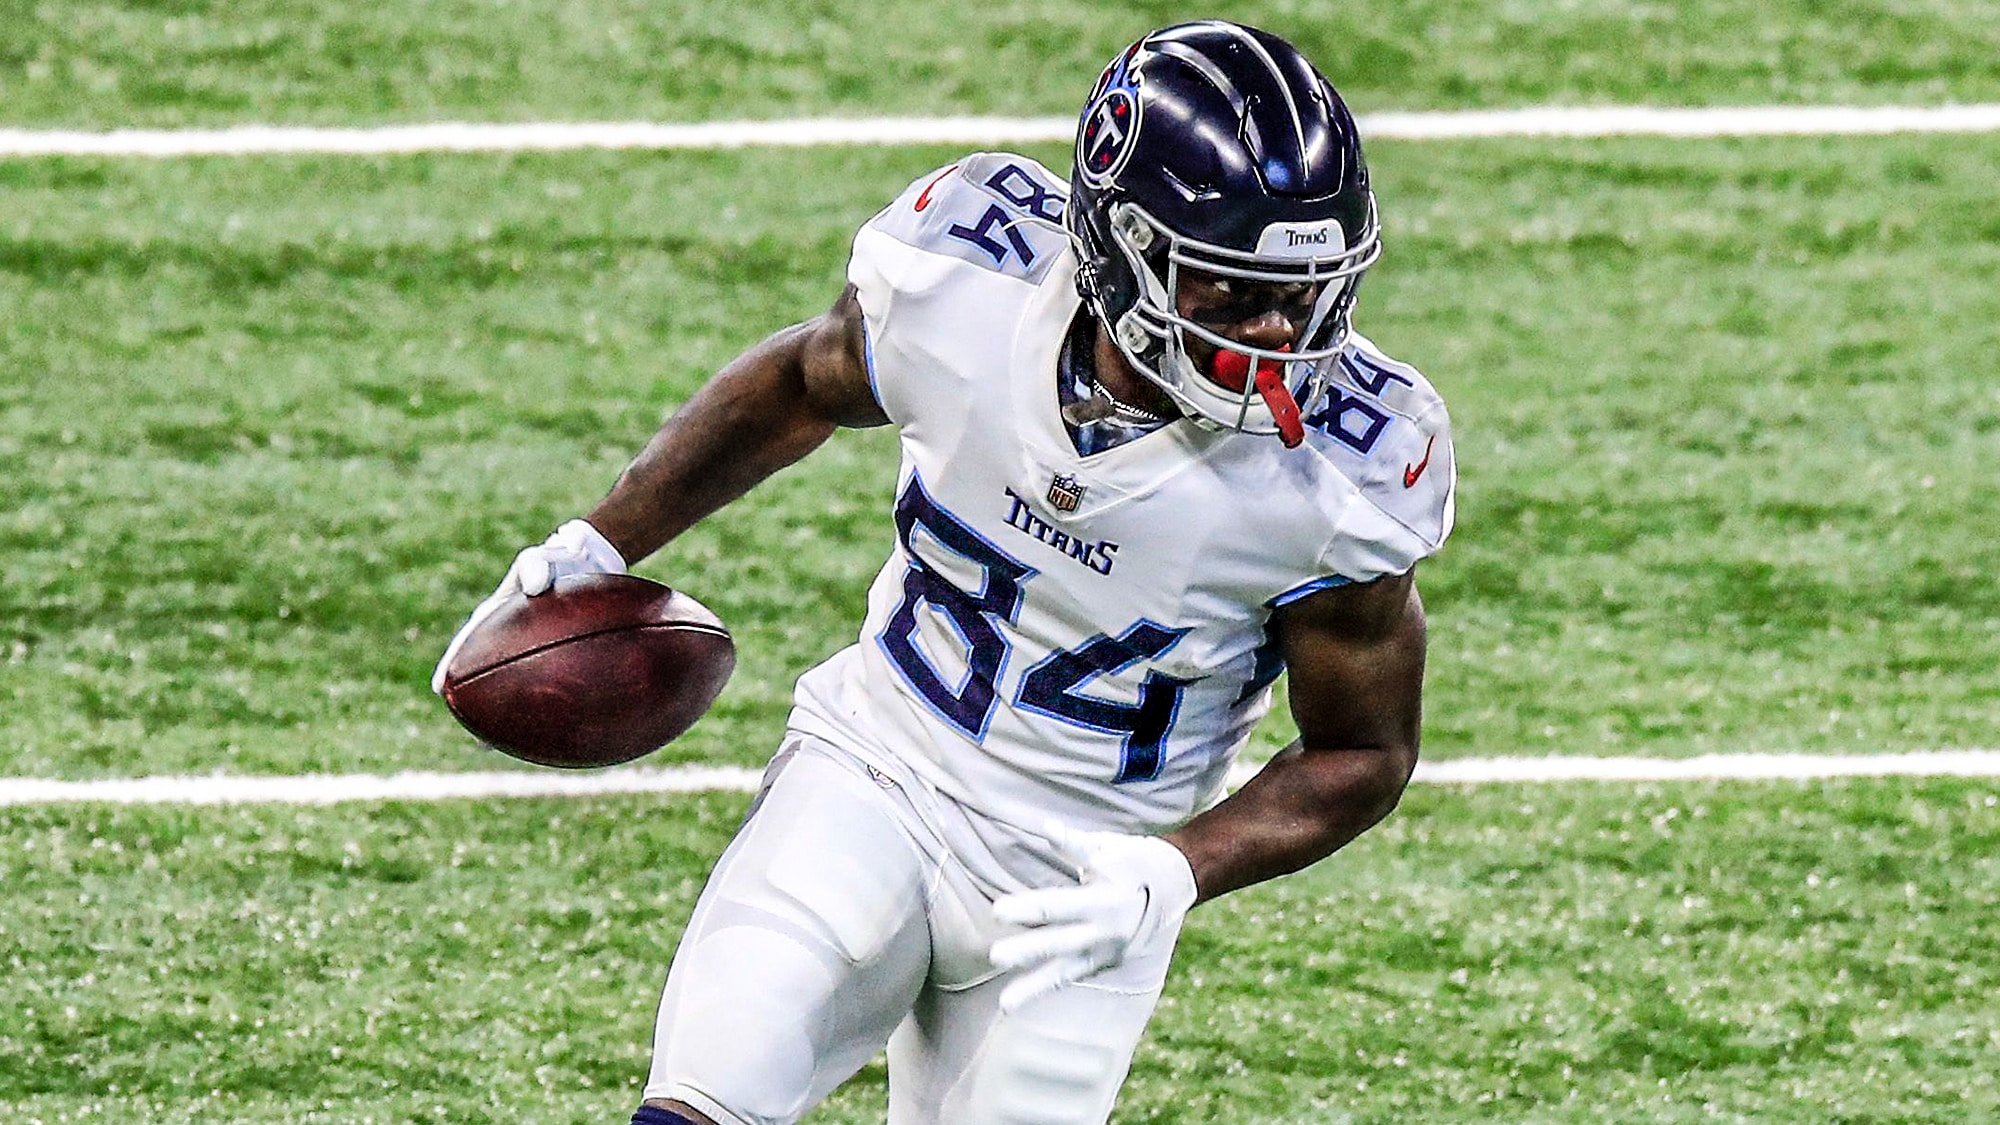 INDIANAPOLIS, INDIANA - NOVEMBER 29: Corey Davis #84 of the Tennessee Titans runs the ball against the Indianapolis Colts at Lucas Oil Stadium on November 29, 2020 in Indianapolis, Indiana.